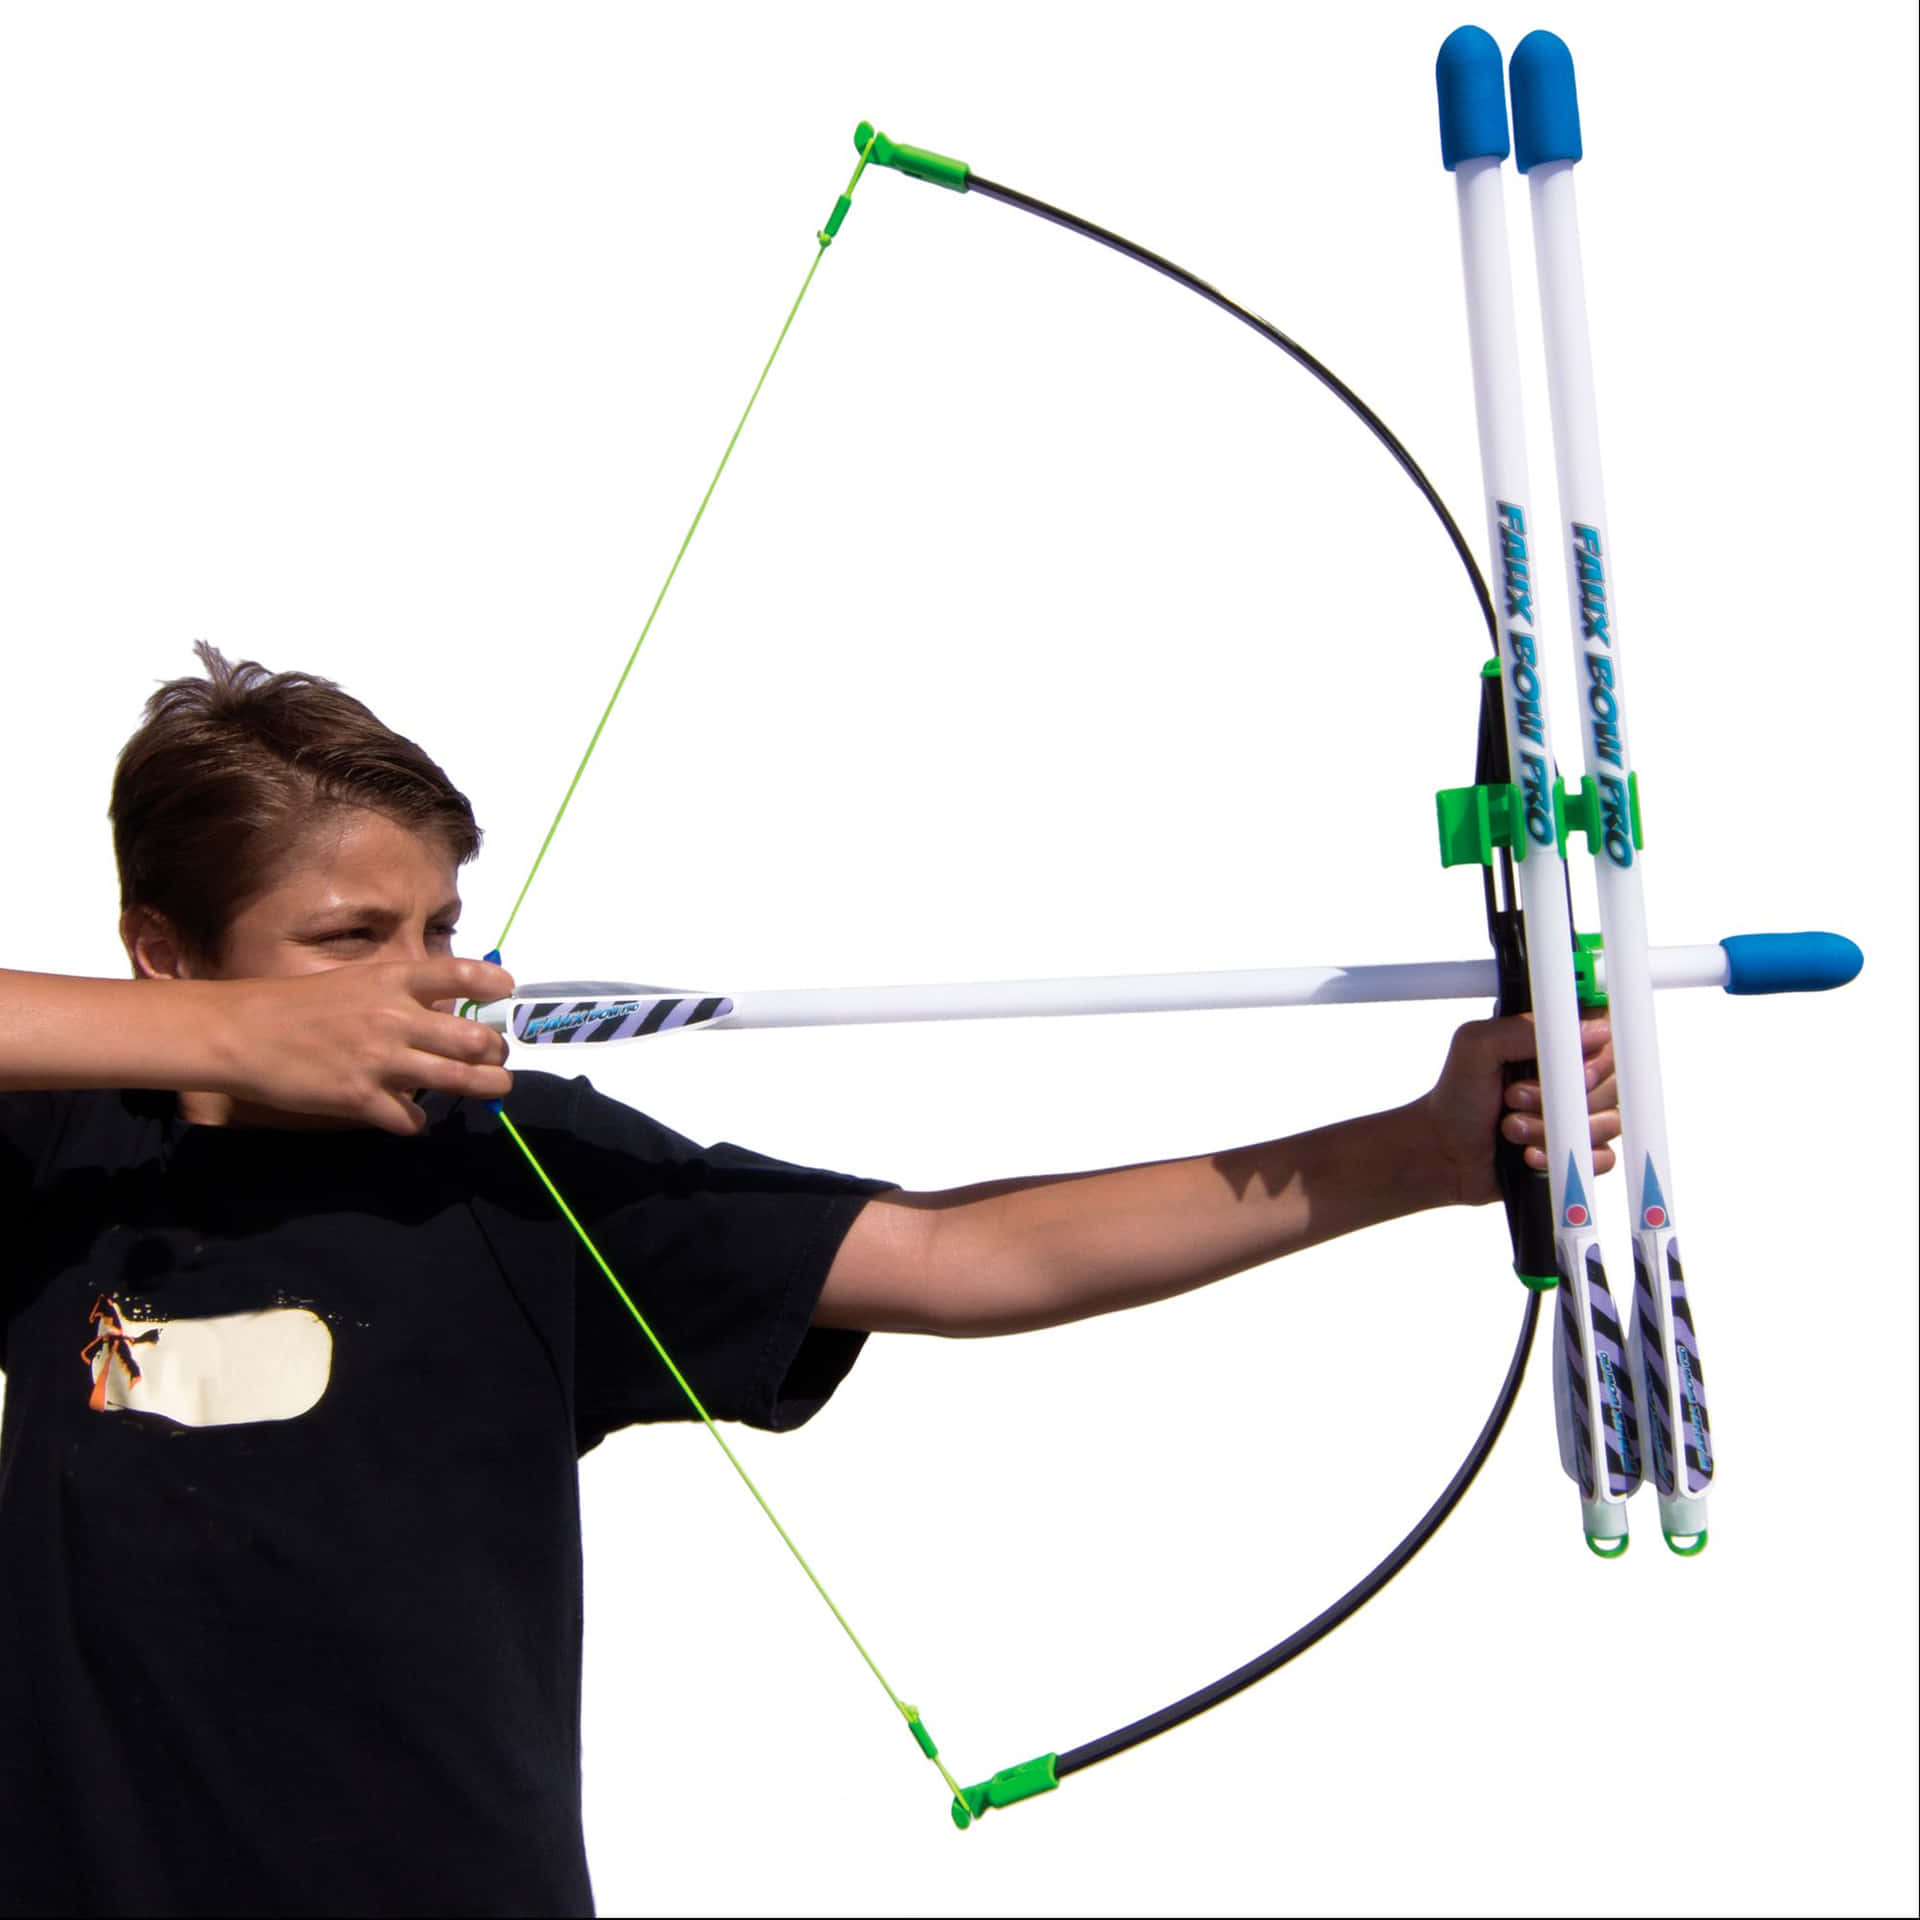 A Boy Is Holding A Bow And Arrow